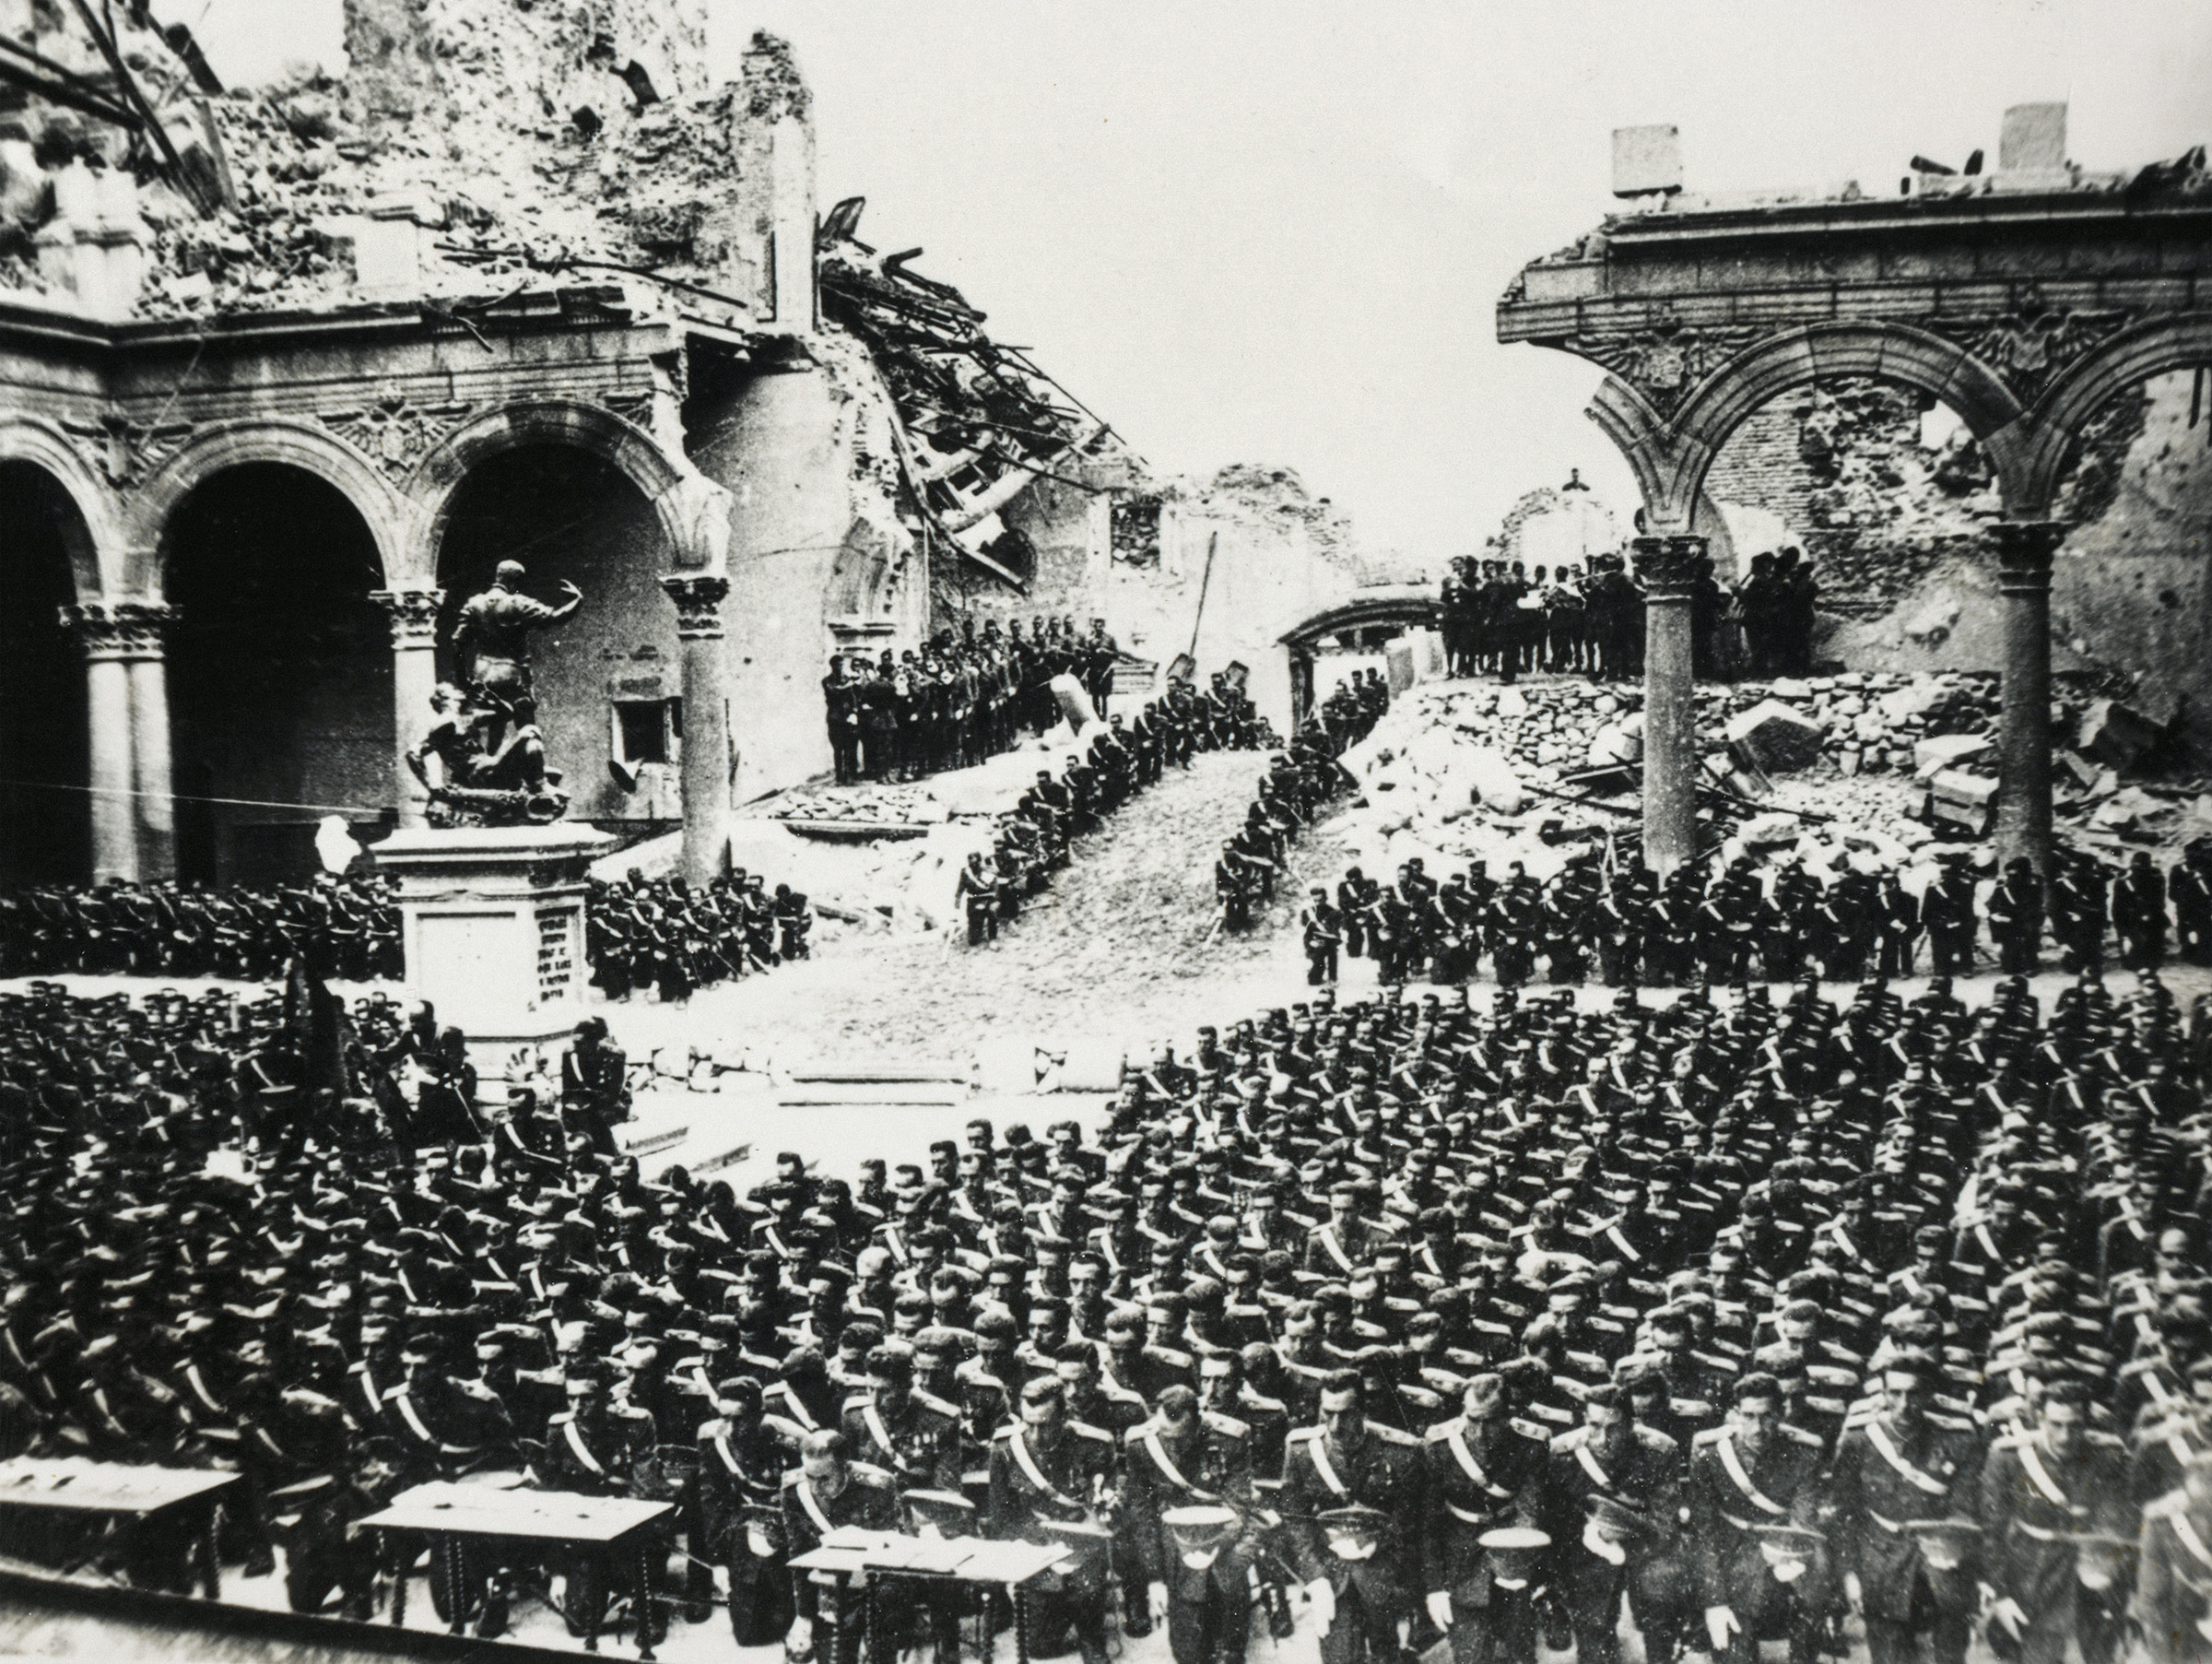 Cadets from the Francoist army swearing allegiance in the Alcazar in Toledo, Spain, after it was destroyed by bombing, in 1937.